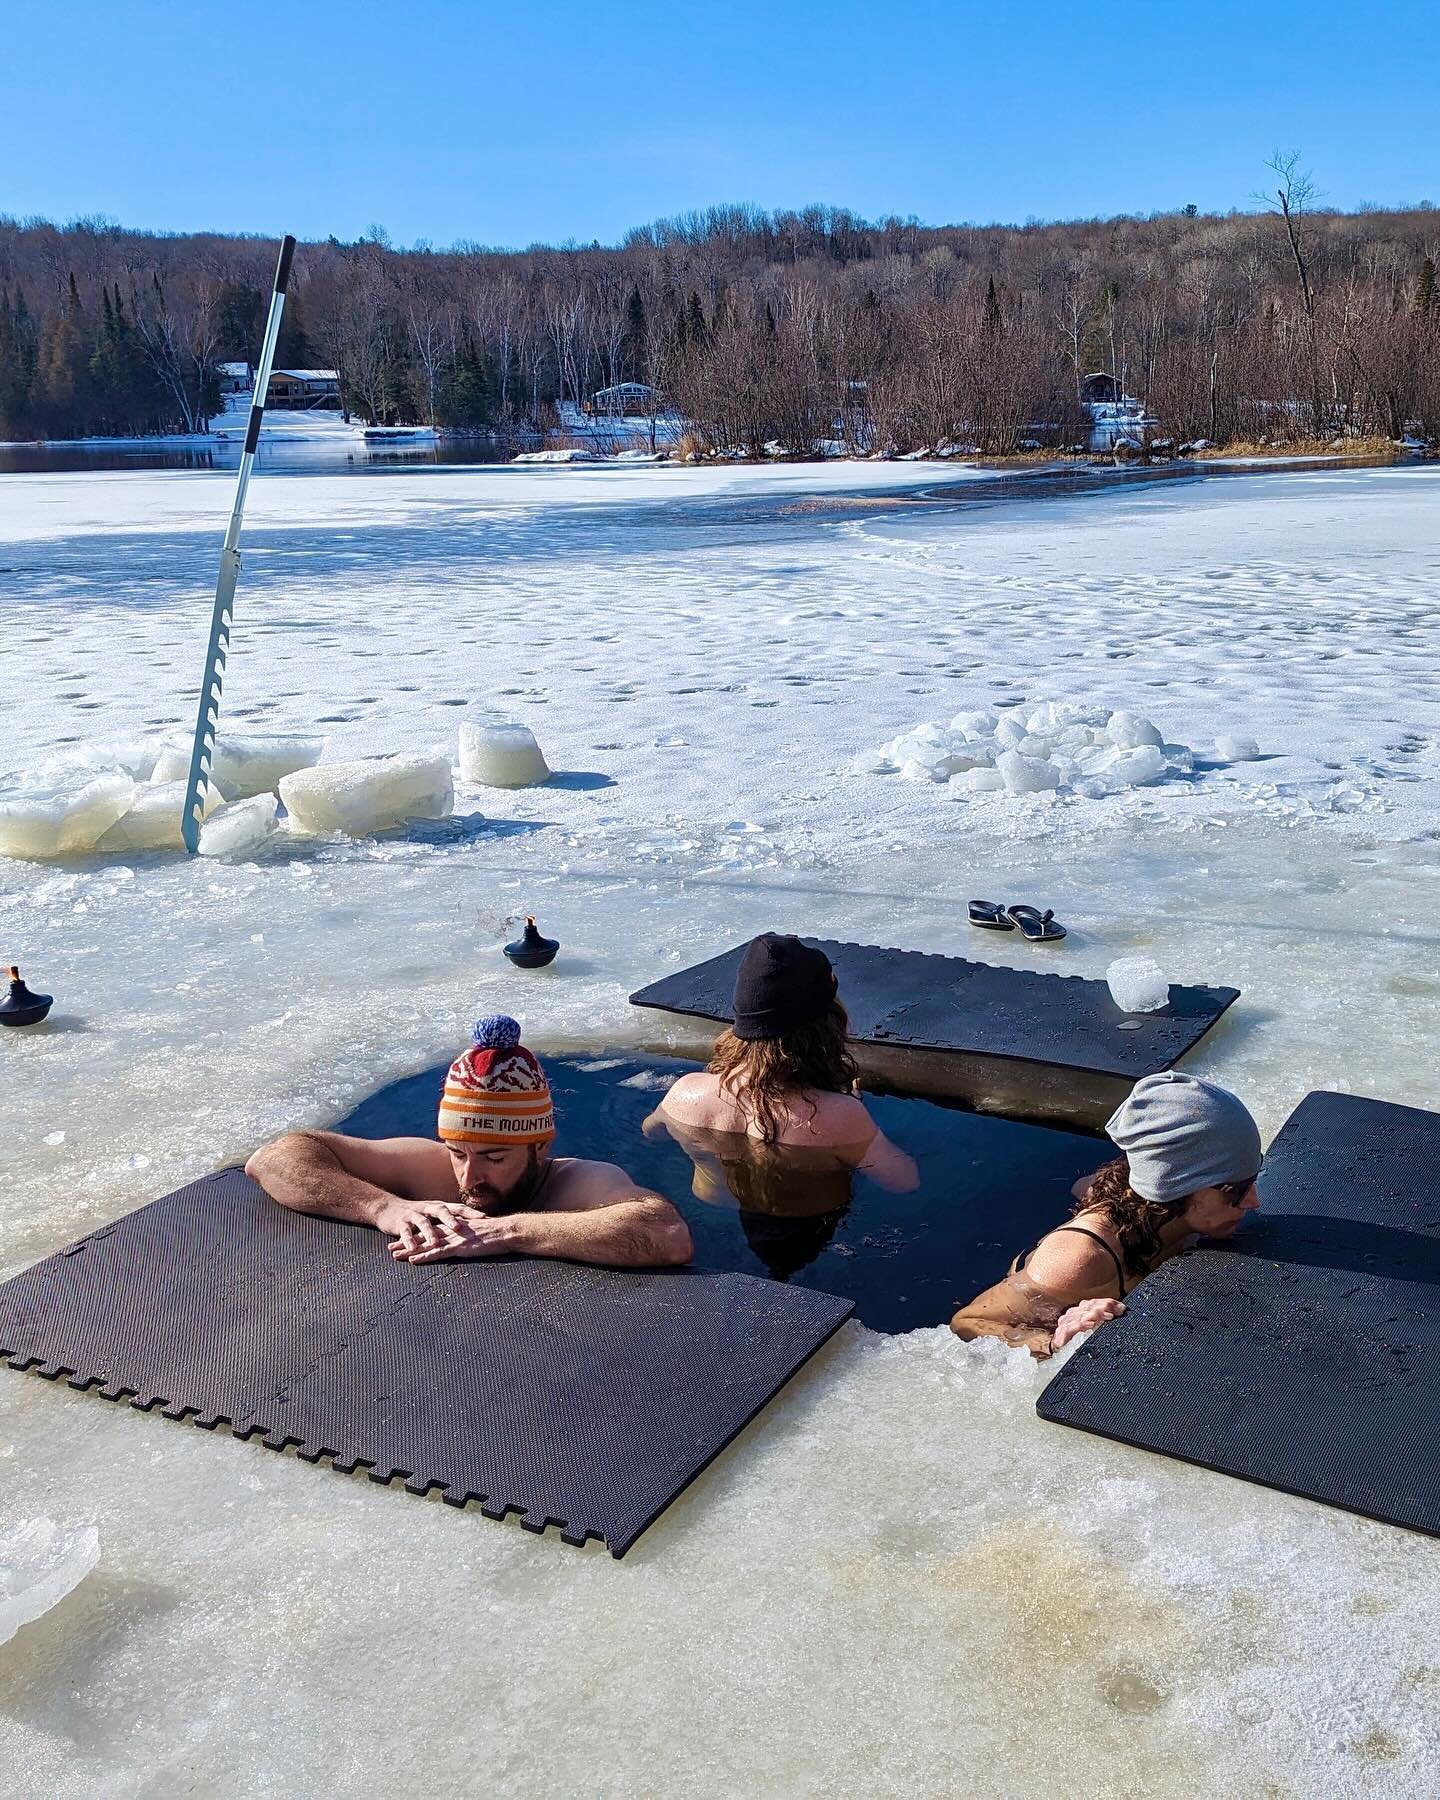 .
Magical Ice Camp days ❄️

We miss winter and we&rsquo;ve been flipping through trip pictures to help us cope with the warm weather 🥲

Here are some pictures from our first Ice Camp, hosted this past February in Barry&rsquo;s Bay 😍

We spent 3 rej